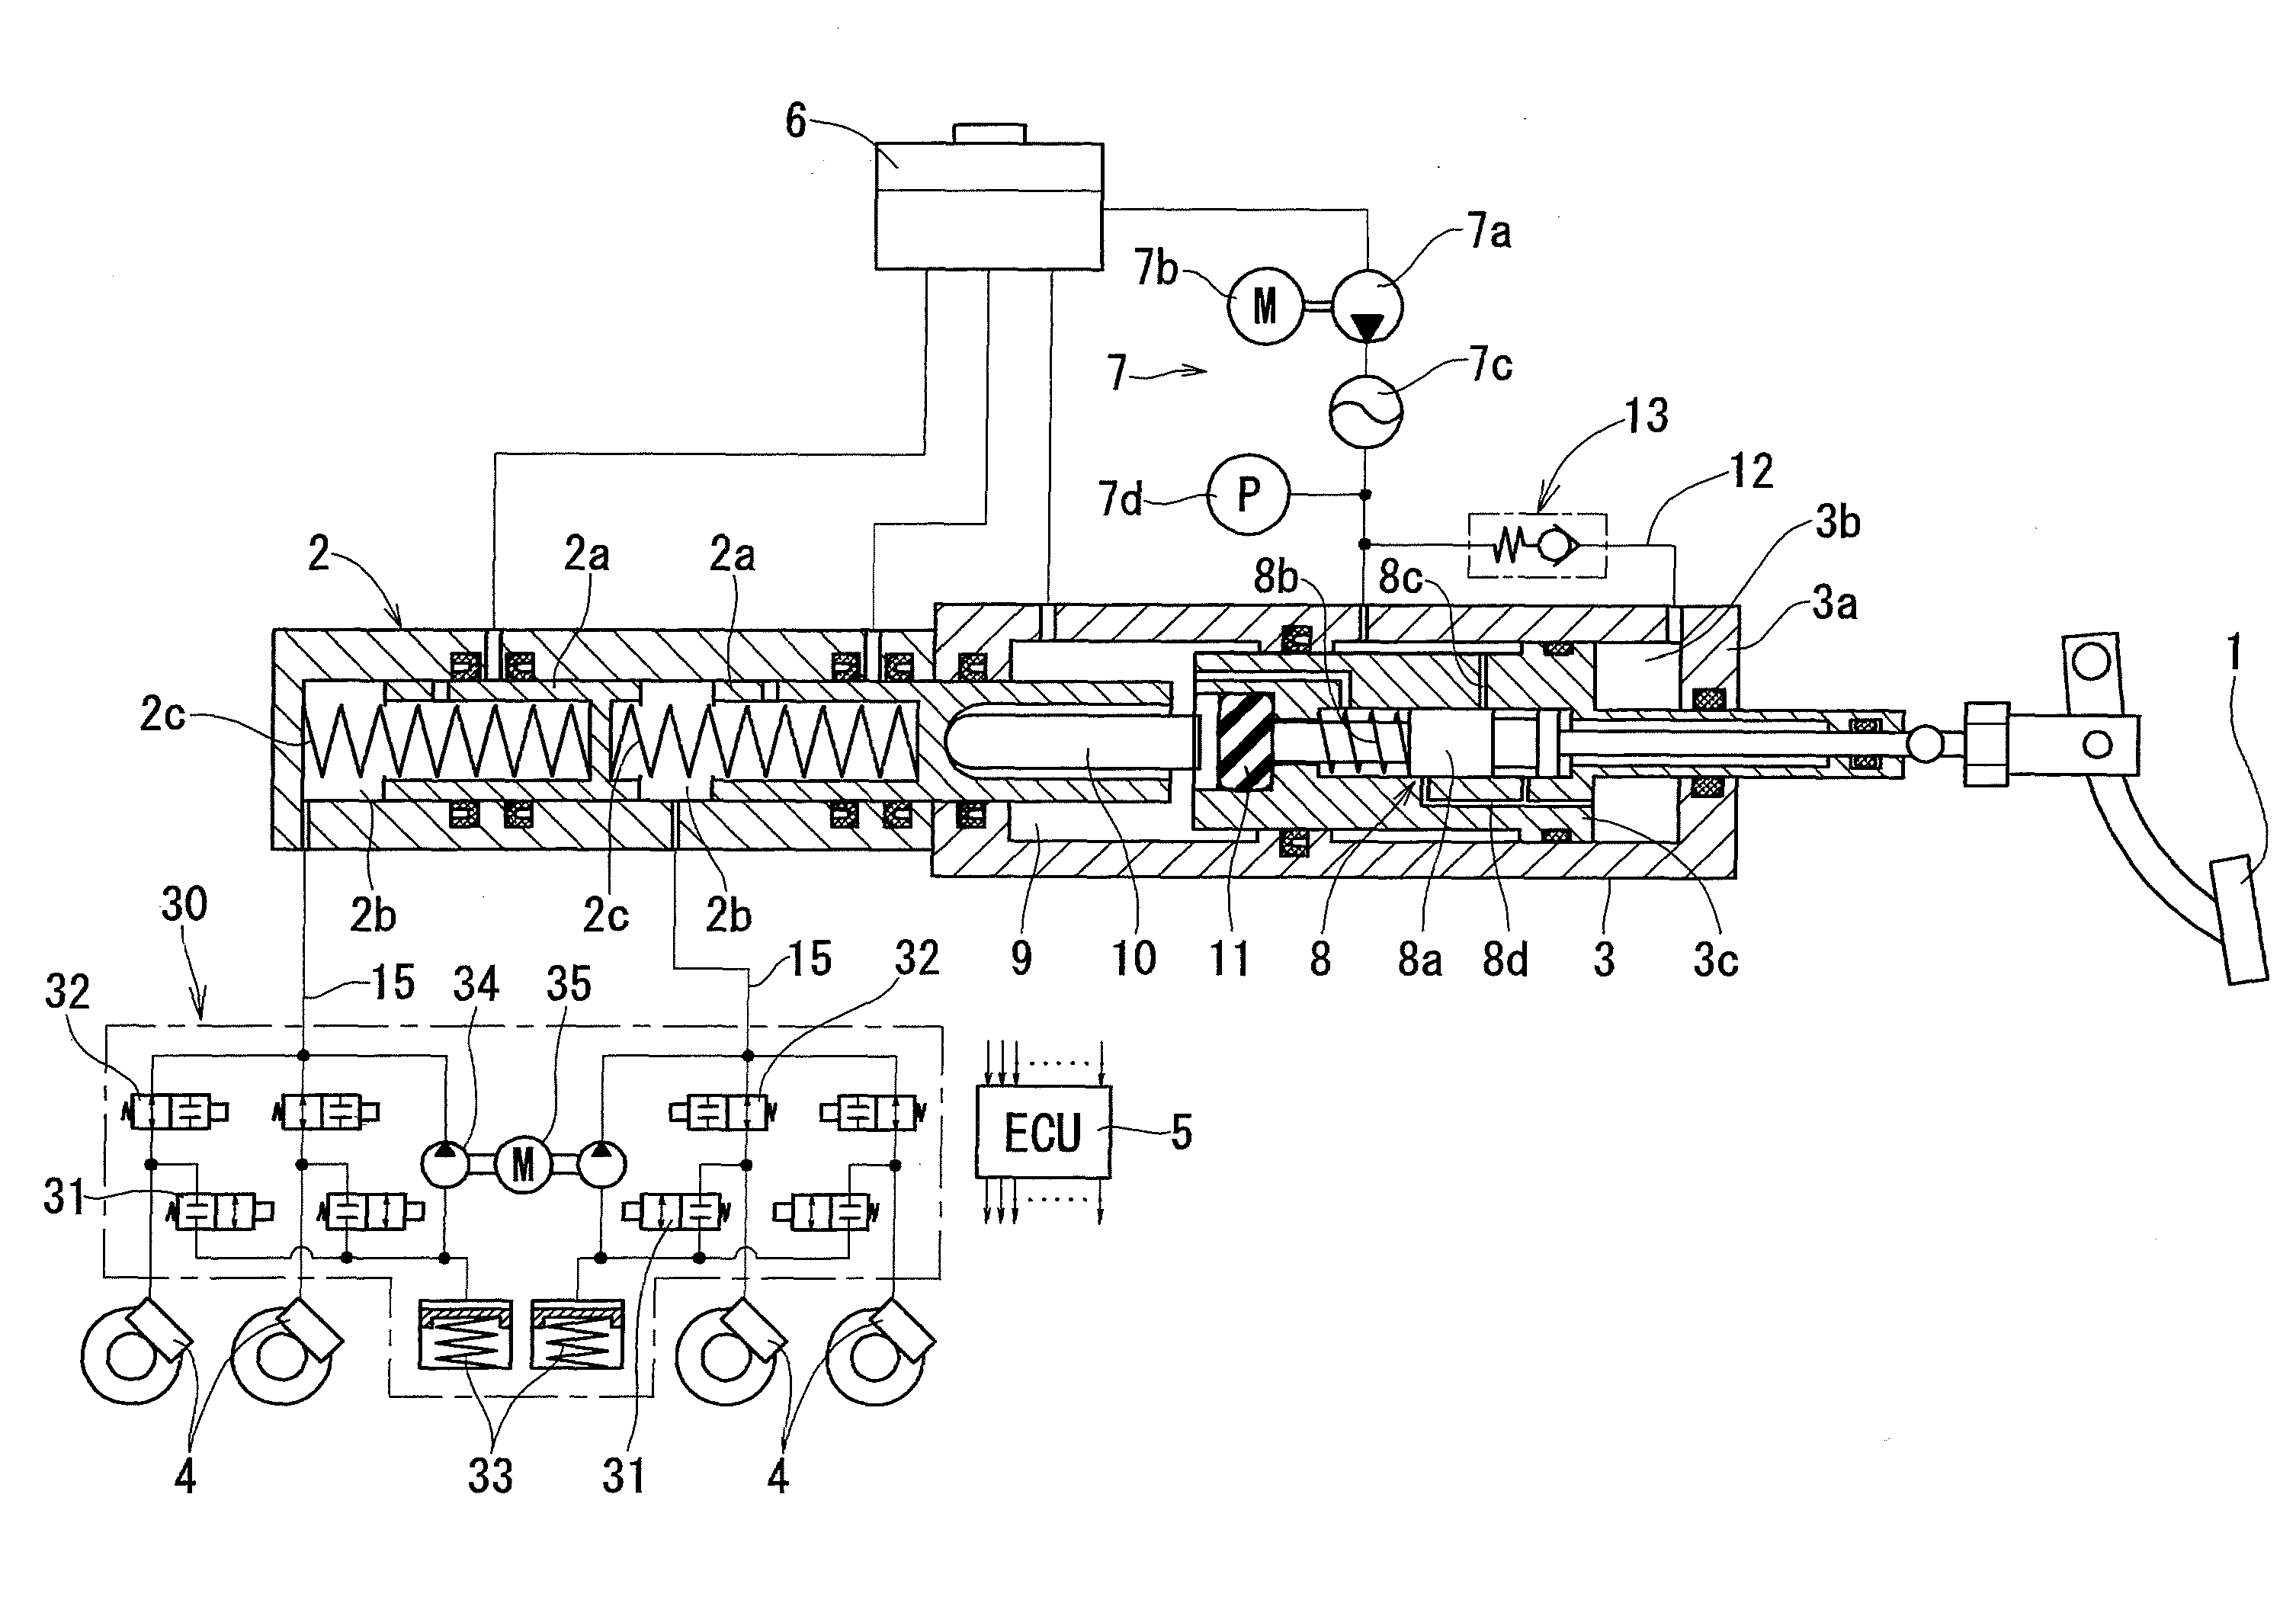 Hydraulic booster and hydraulic brake system using the same